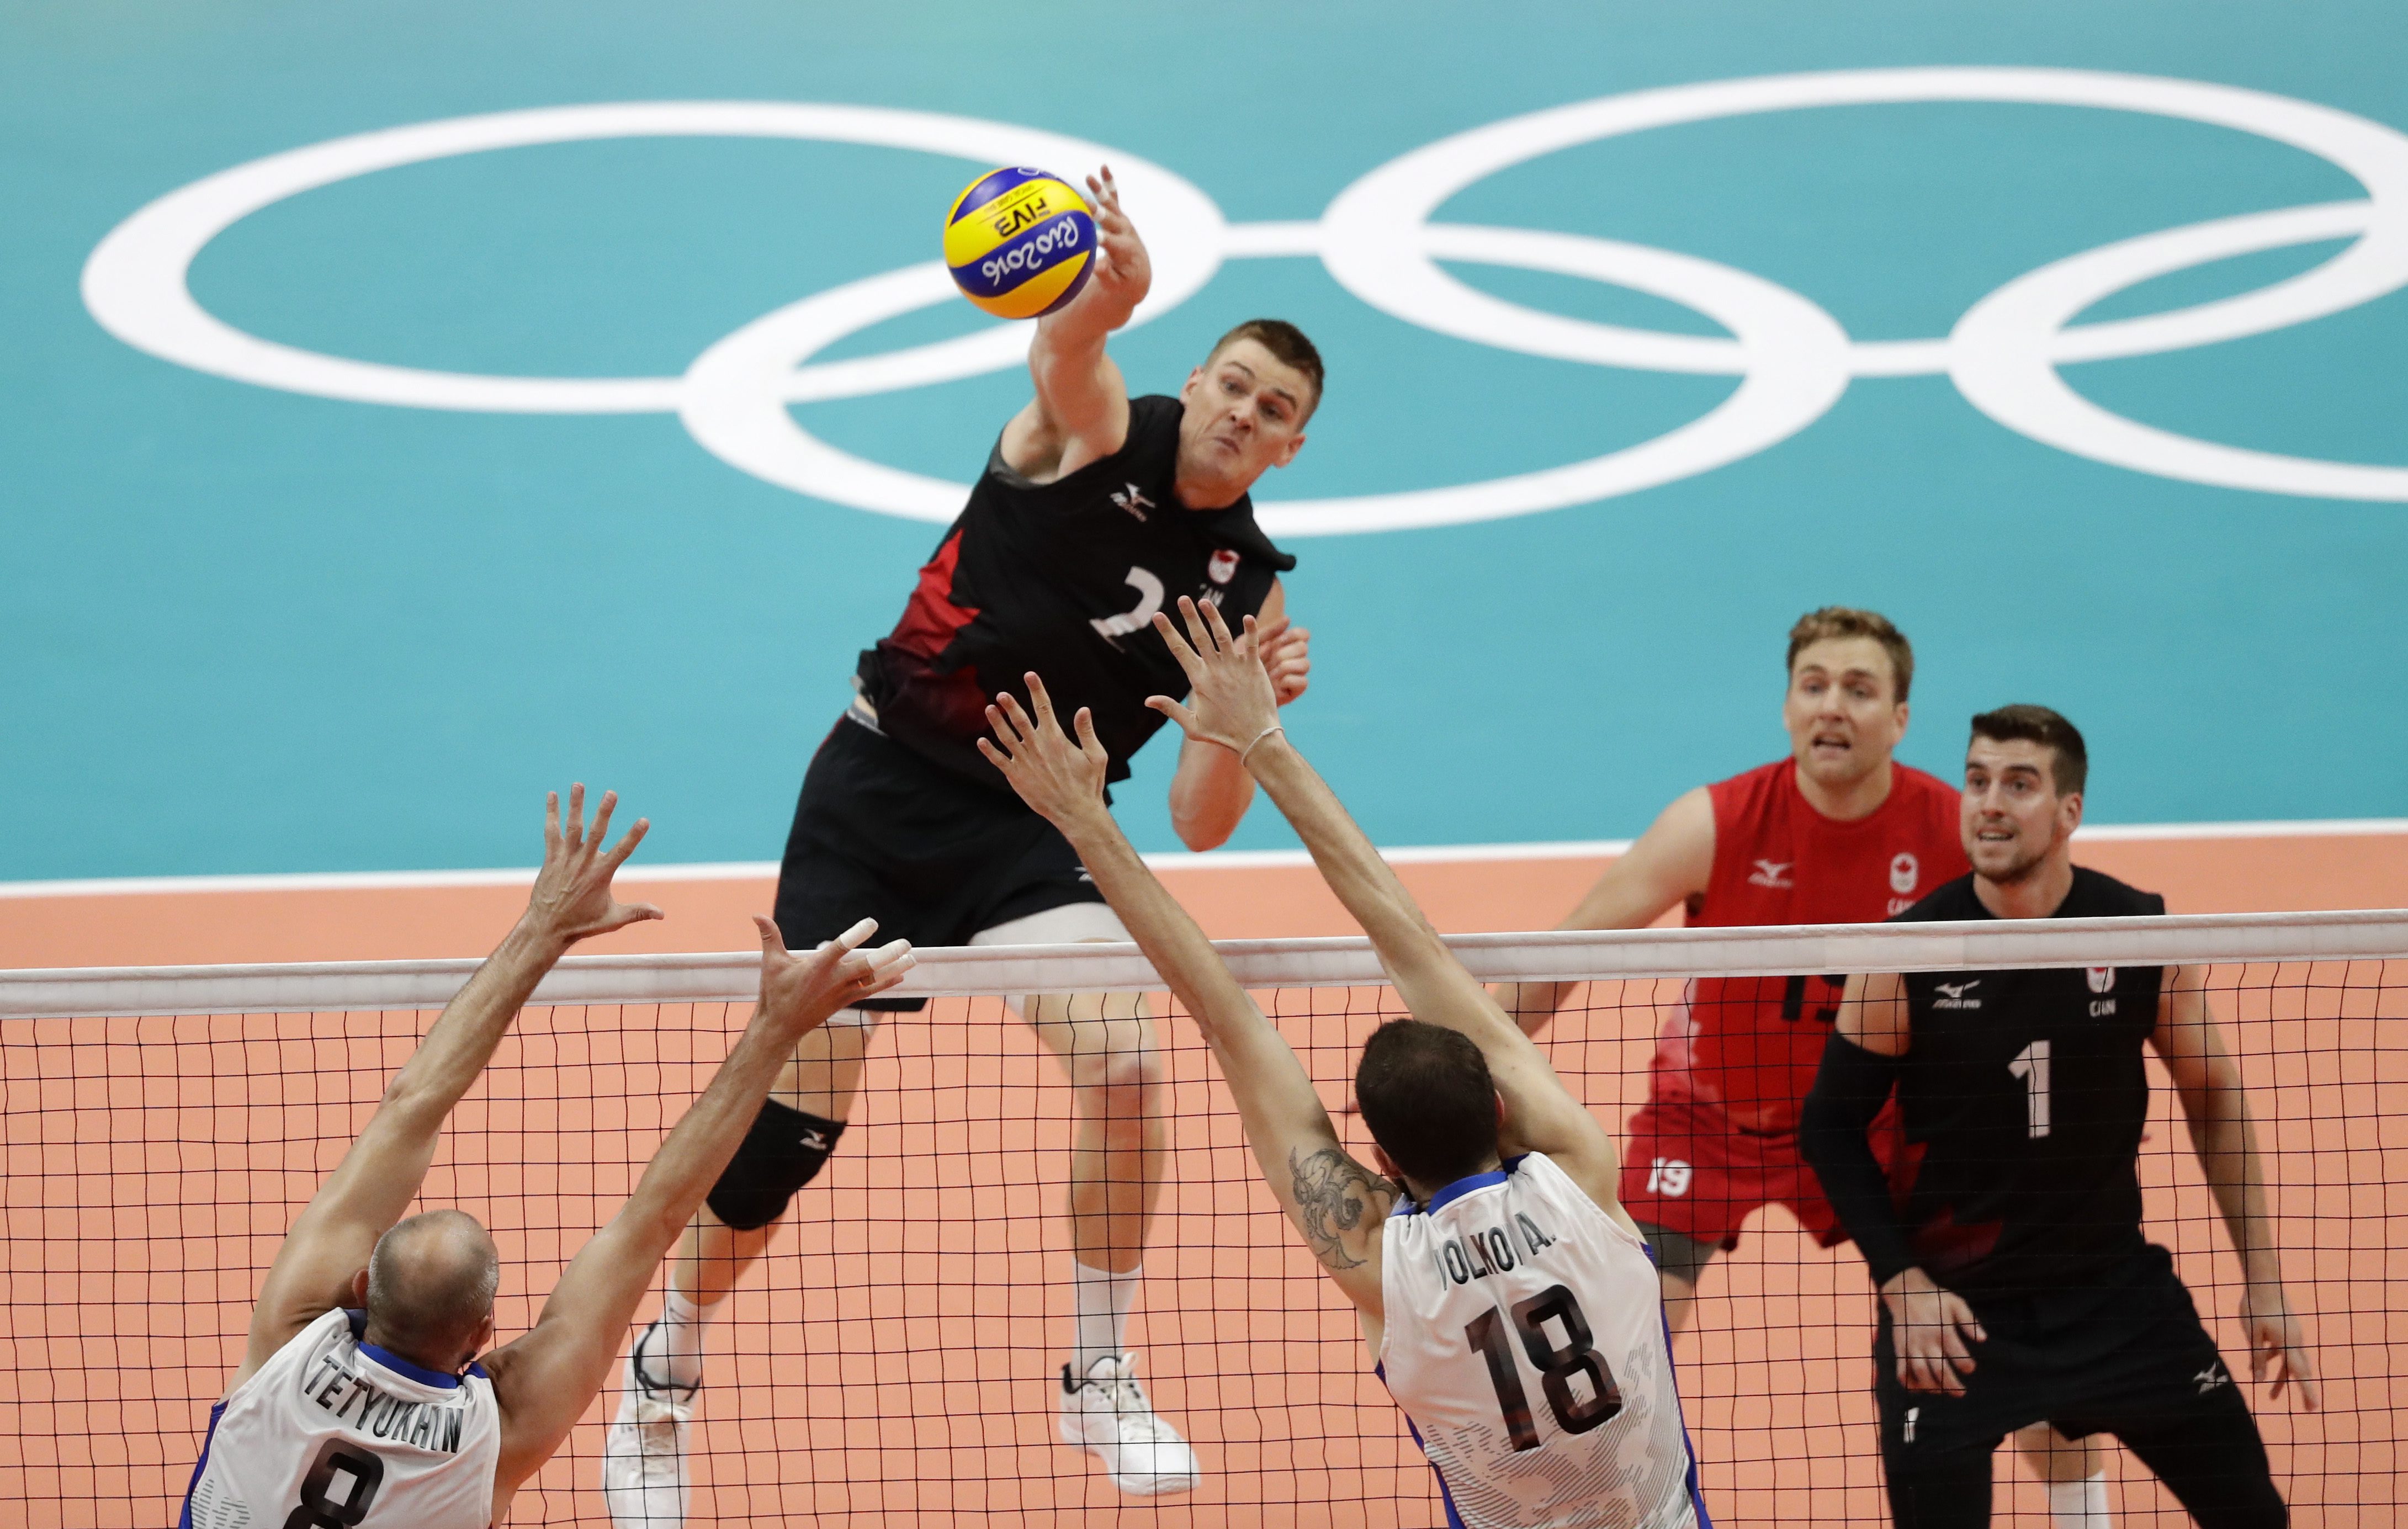 Canada's John Gordon Perrin goes up for a spike that was blocked in a men's quarterfinal volleyball match against Russia at the 2016 Summer Olympics in Rio de Janeiro, Brazil, Wednesday, Aug. 17, 2016. (AP Photo/Robert F. Bukaty)